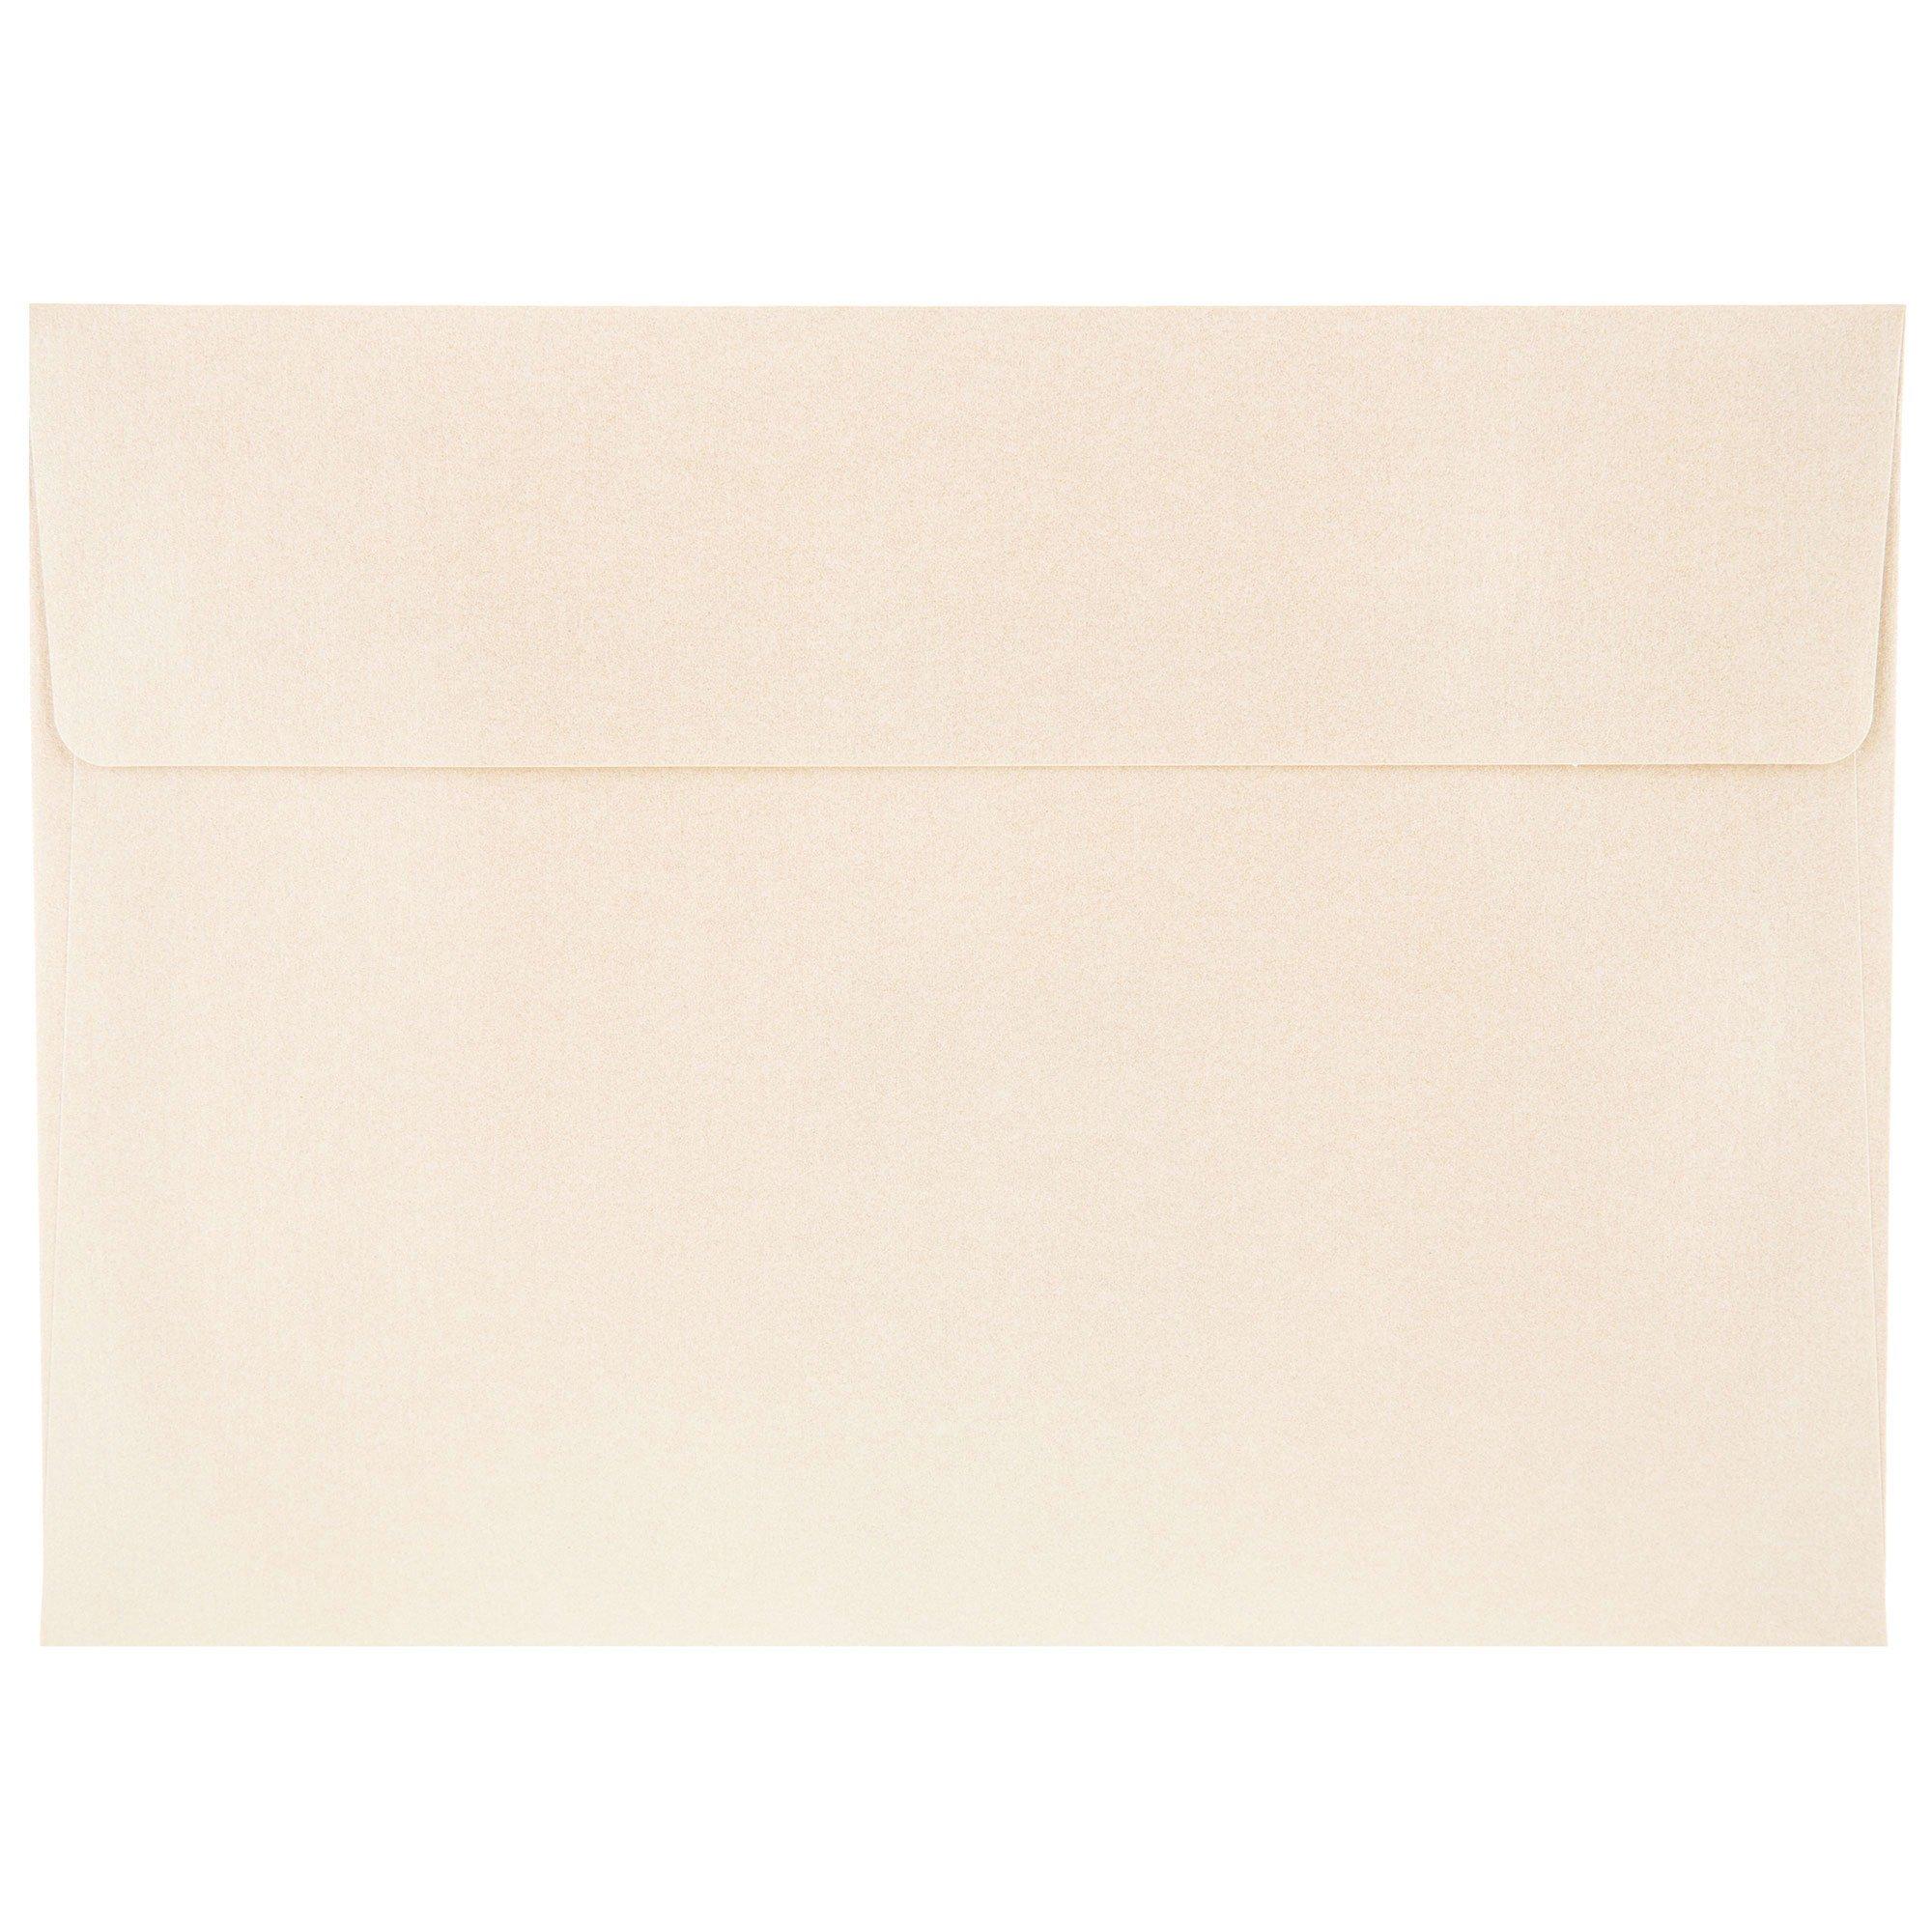 Envelope-with-gold-wings color full-size hyper-realistic on Craiyon